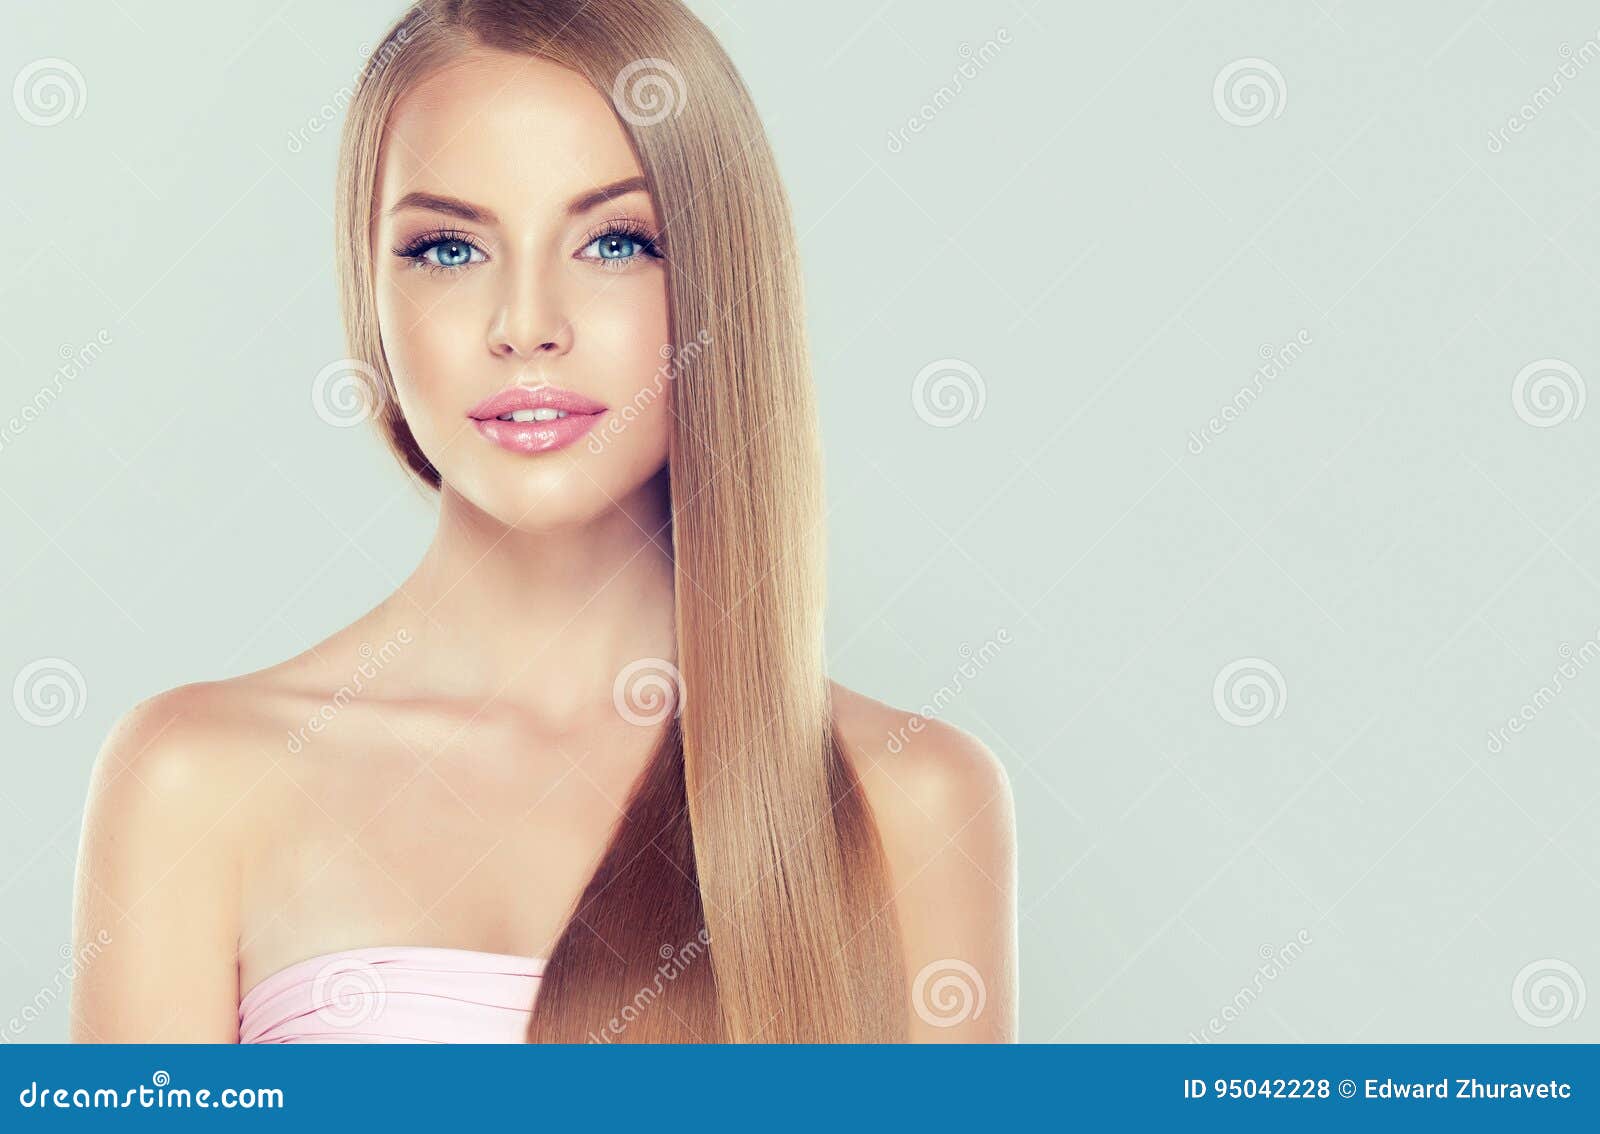 shiny blond hair images